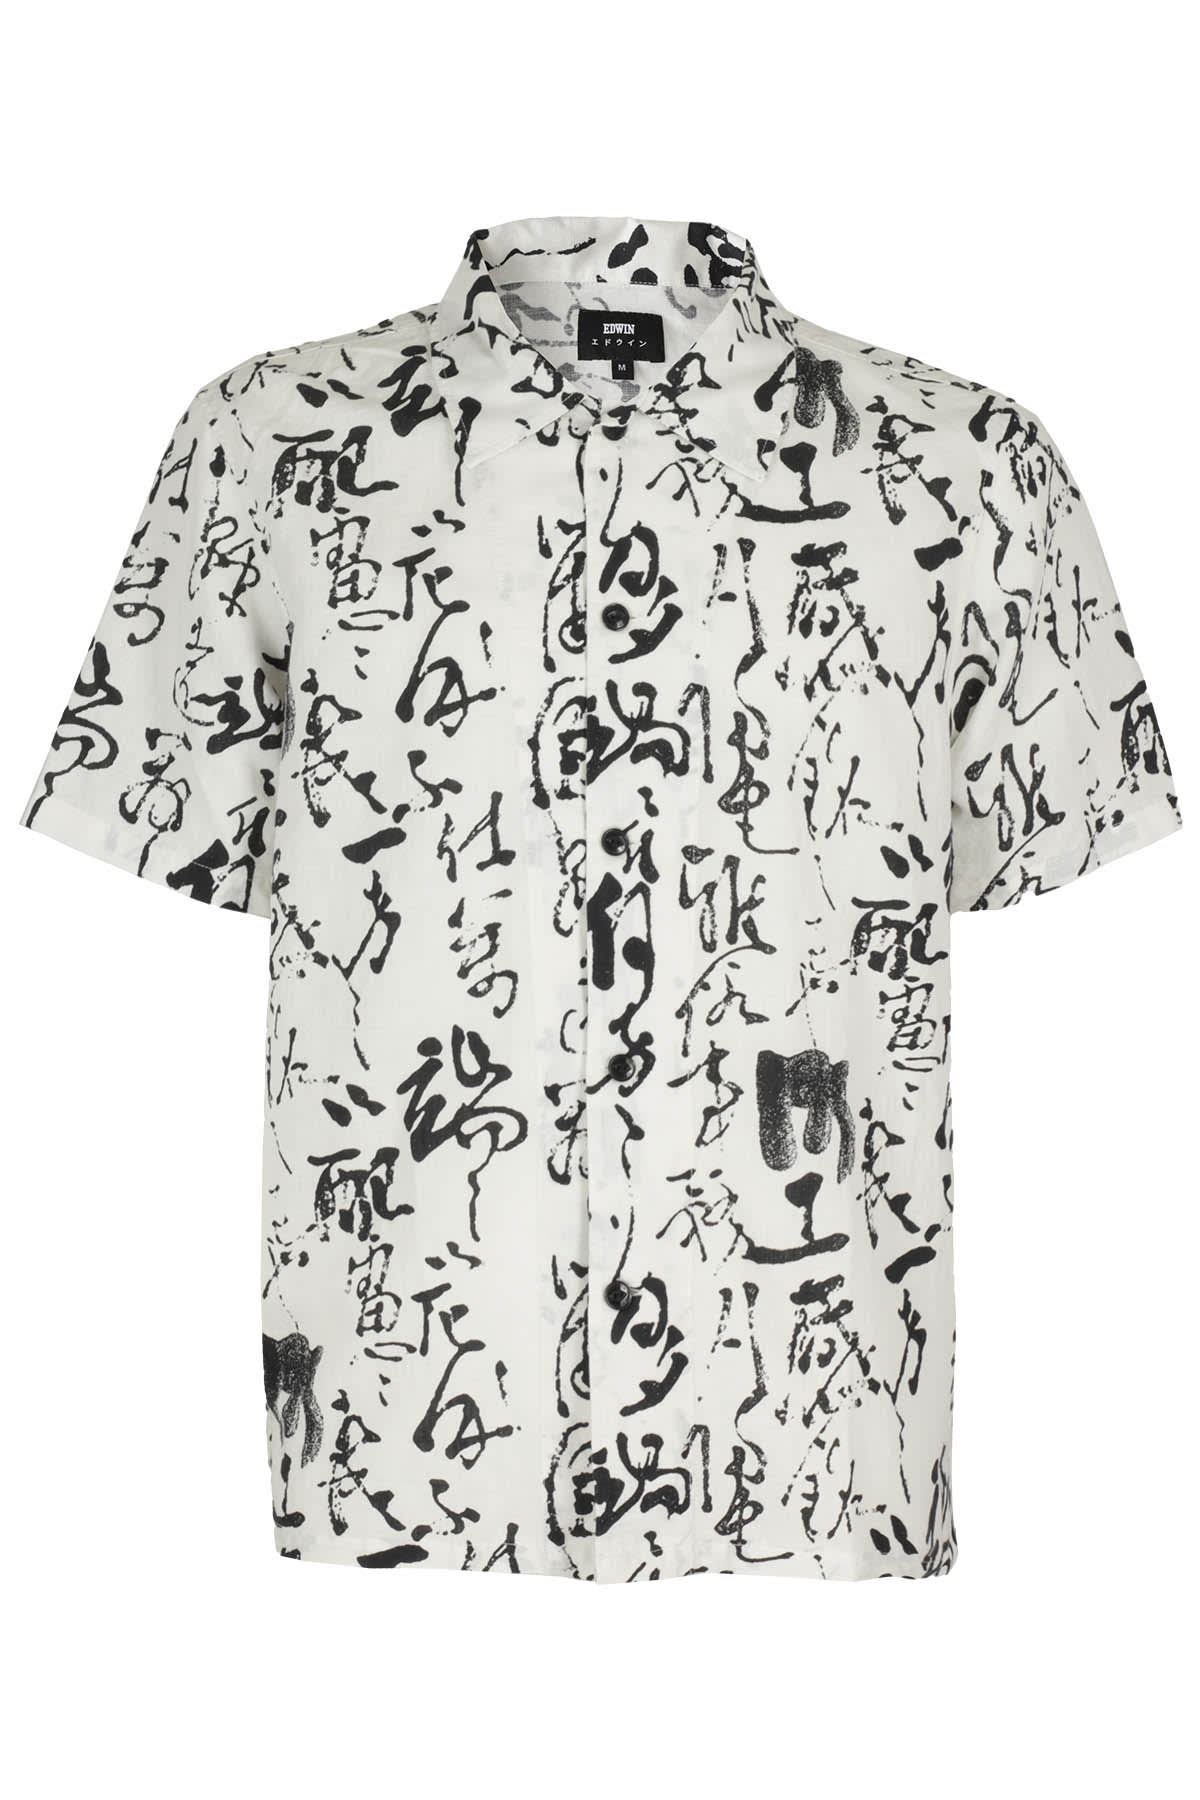 EDWIN PRIVATE LETTER SHIRT SS